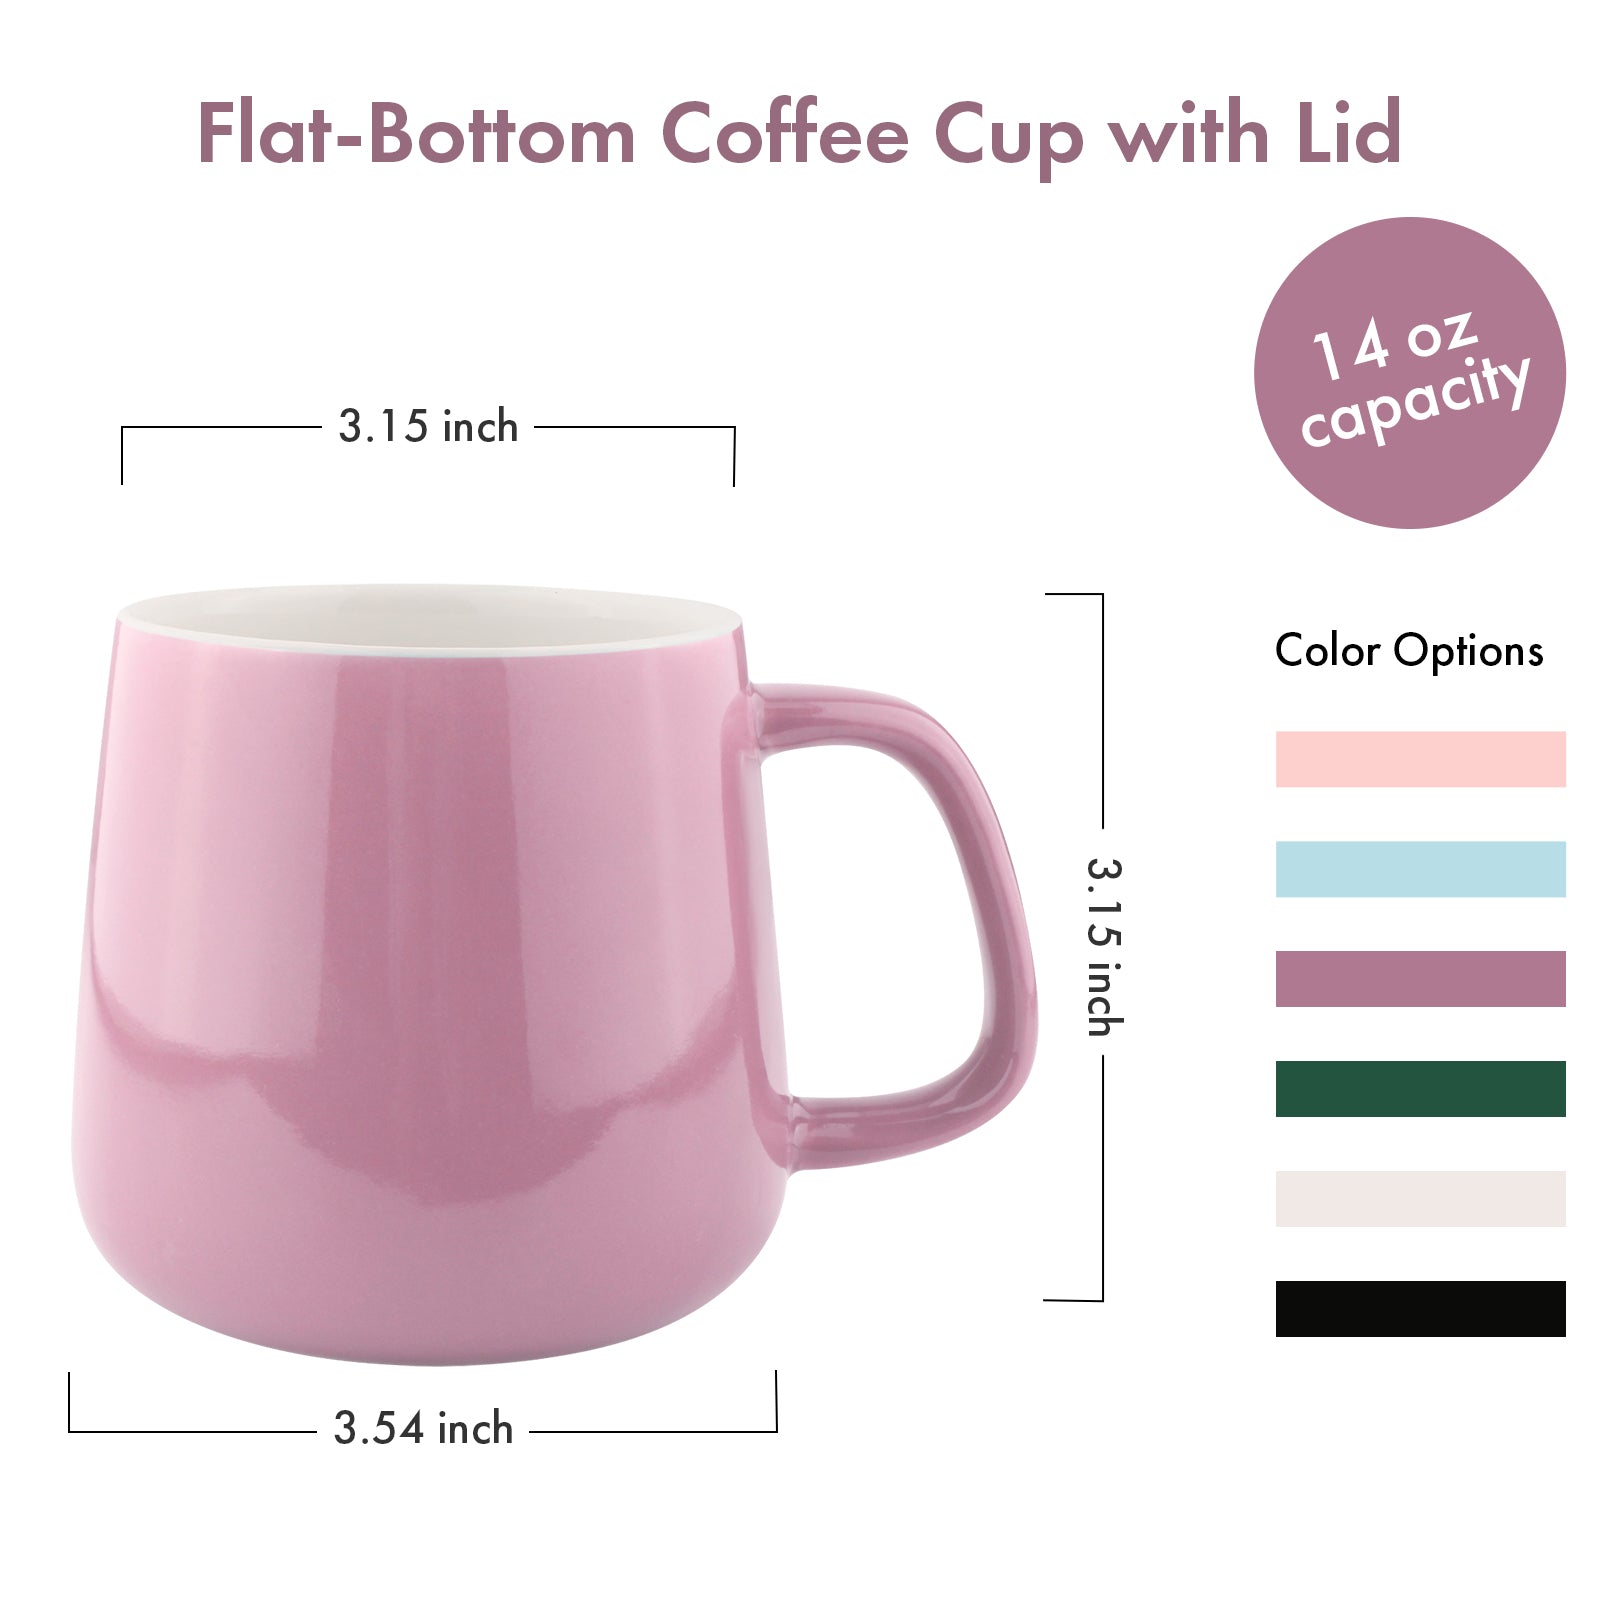 VOBAGA  14 oz Tea Cup with Lid and Flat-Bottom, Coffee Mug for Lover, Girls, Home, Office, Gifts (Purple)